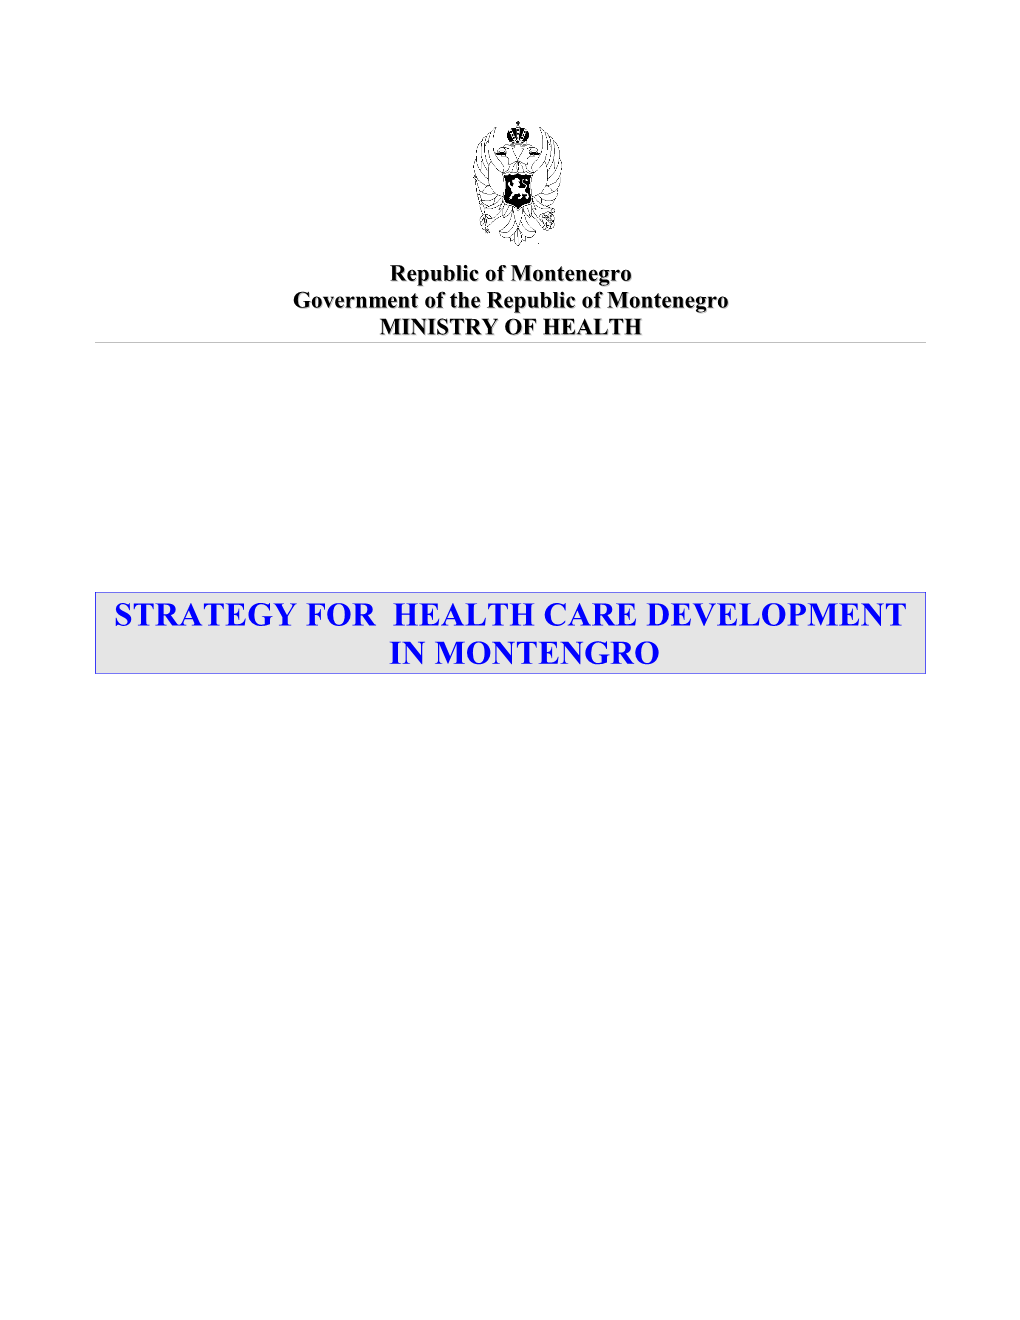 Strategy for Health Care Development of Montenegro